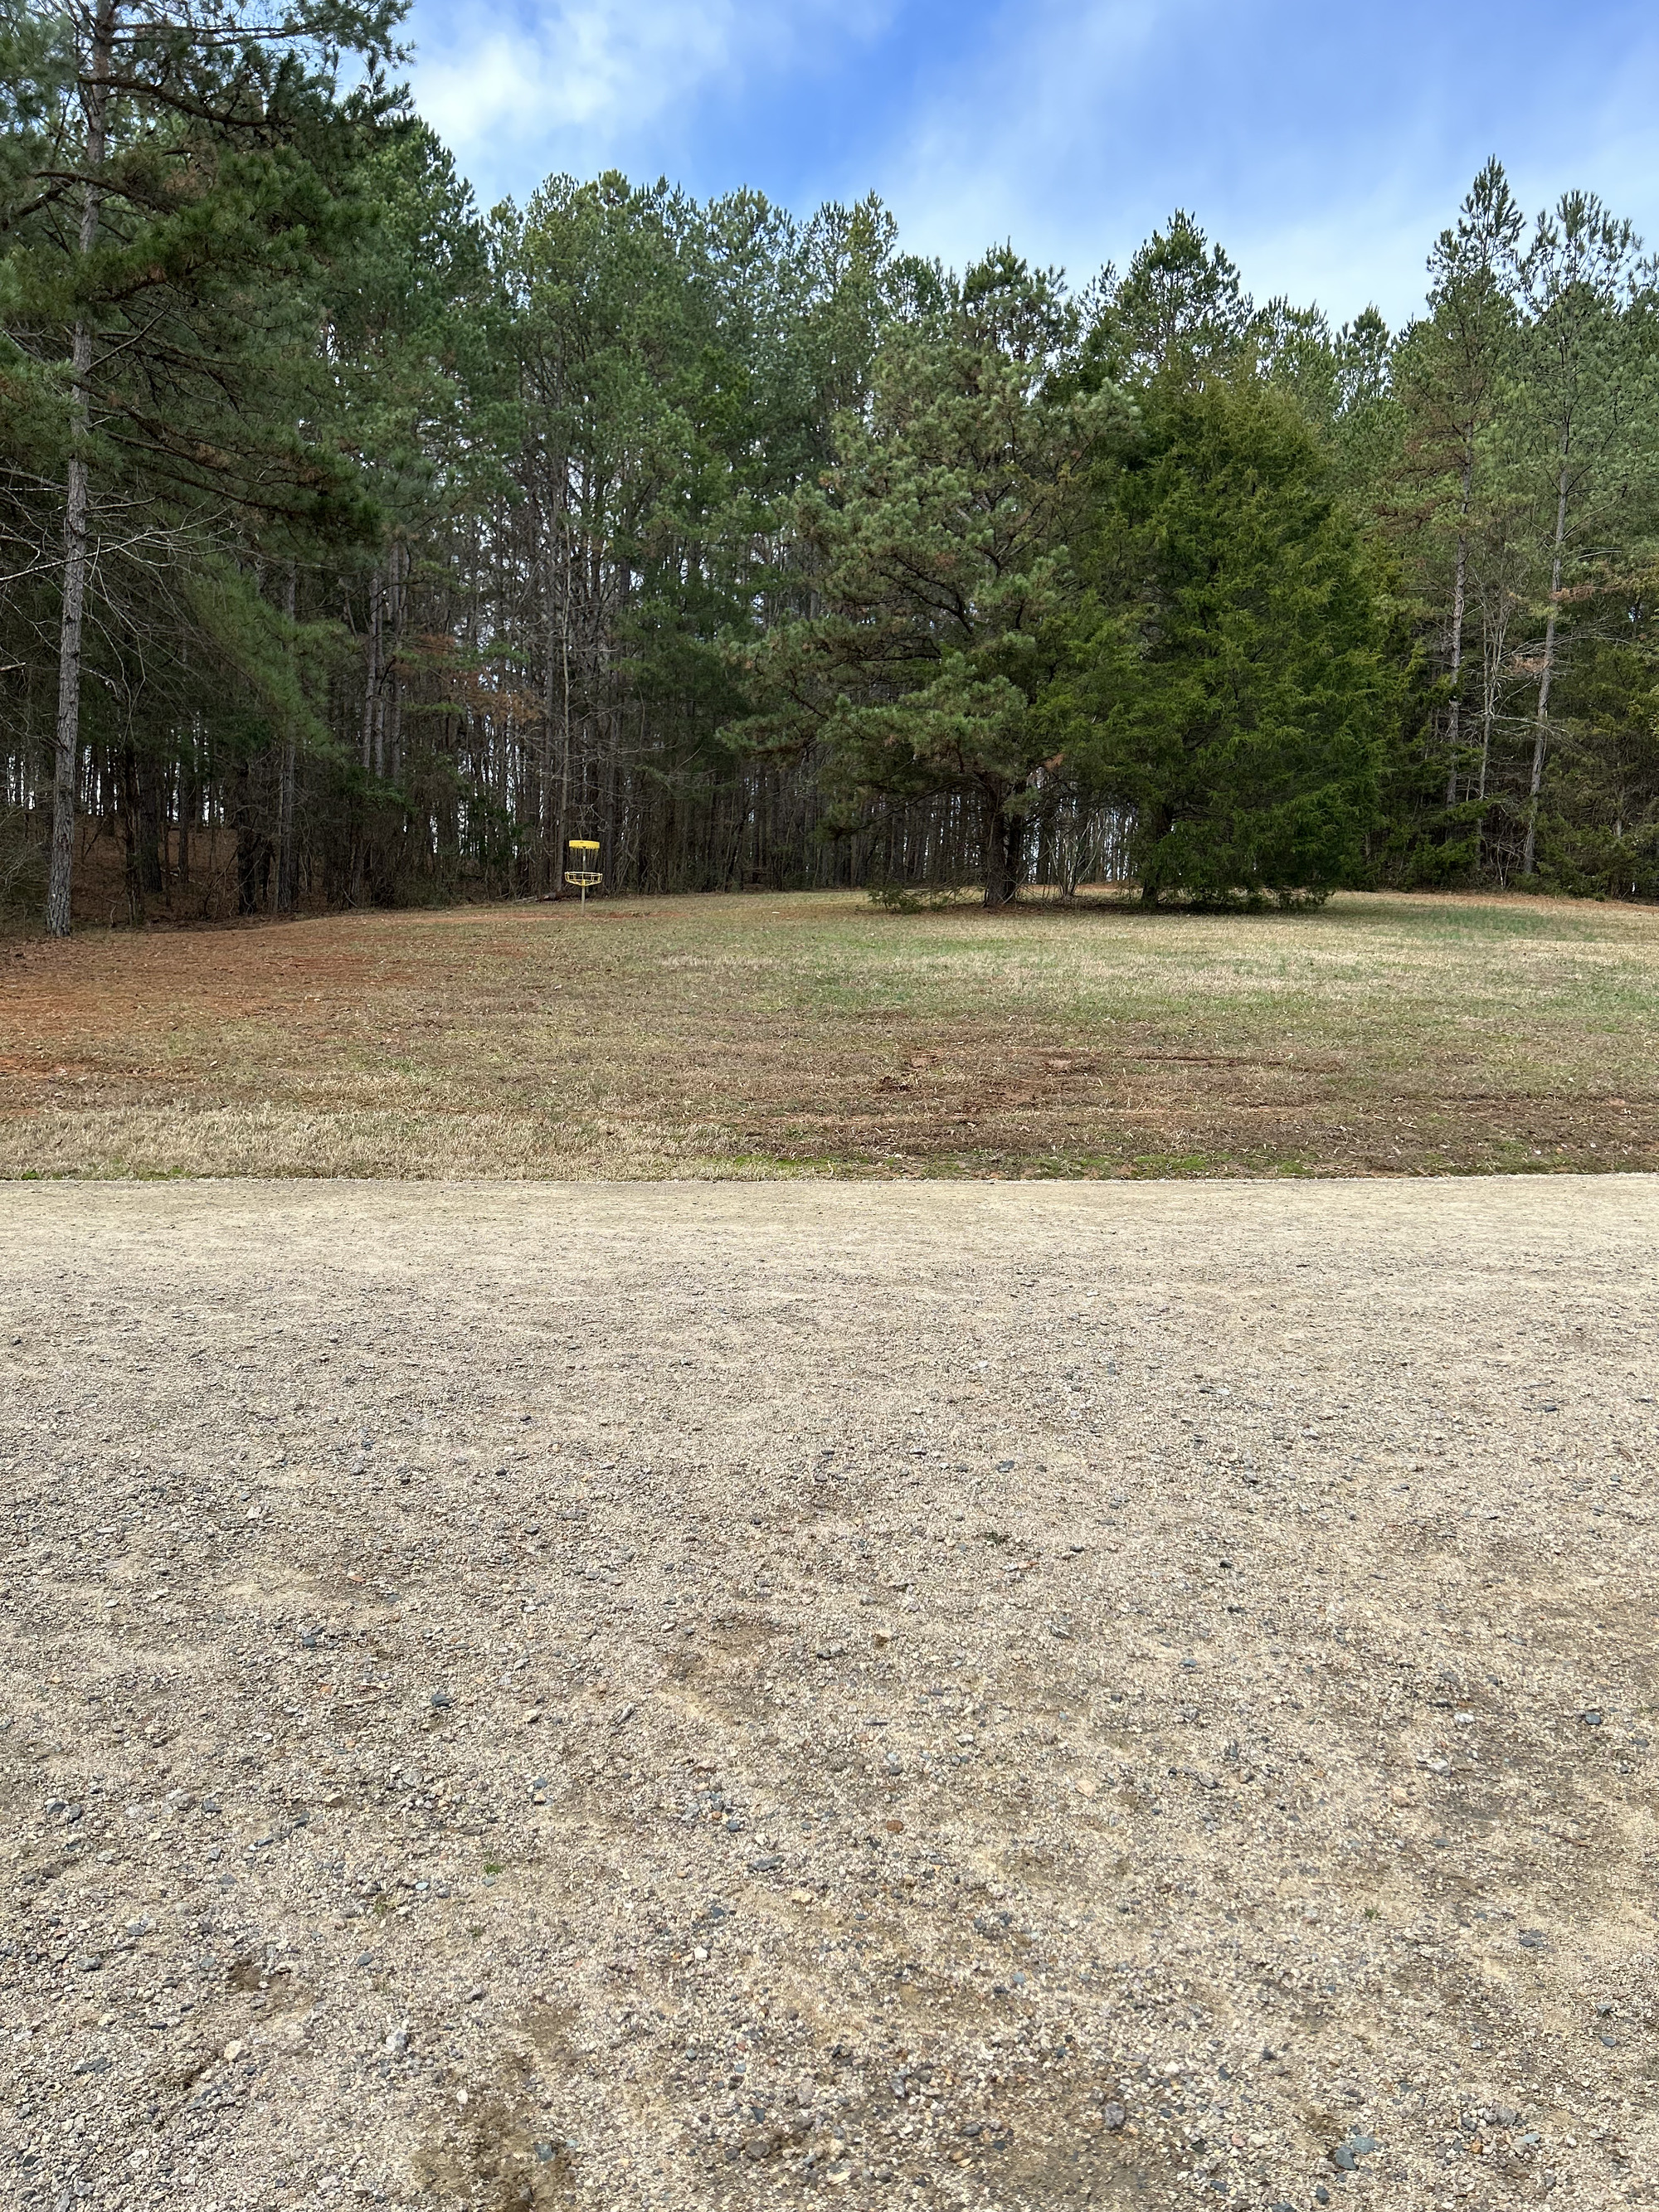 Part of the disc golf course, but also a nice field in general.